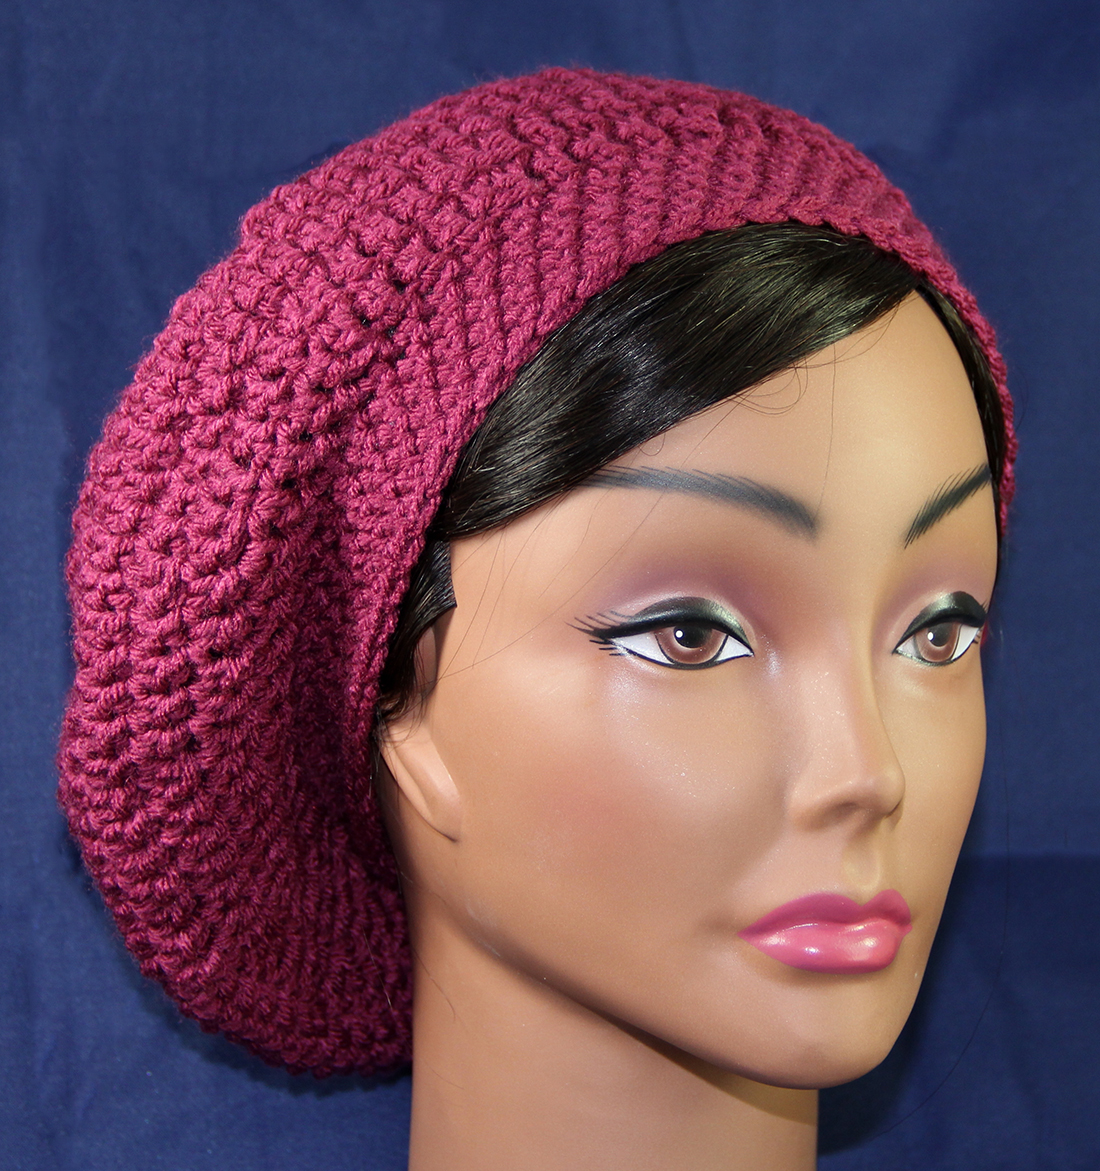 Lady Anne S Cottage Crocheted Slouchy Style Beret Hat Pattern